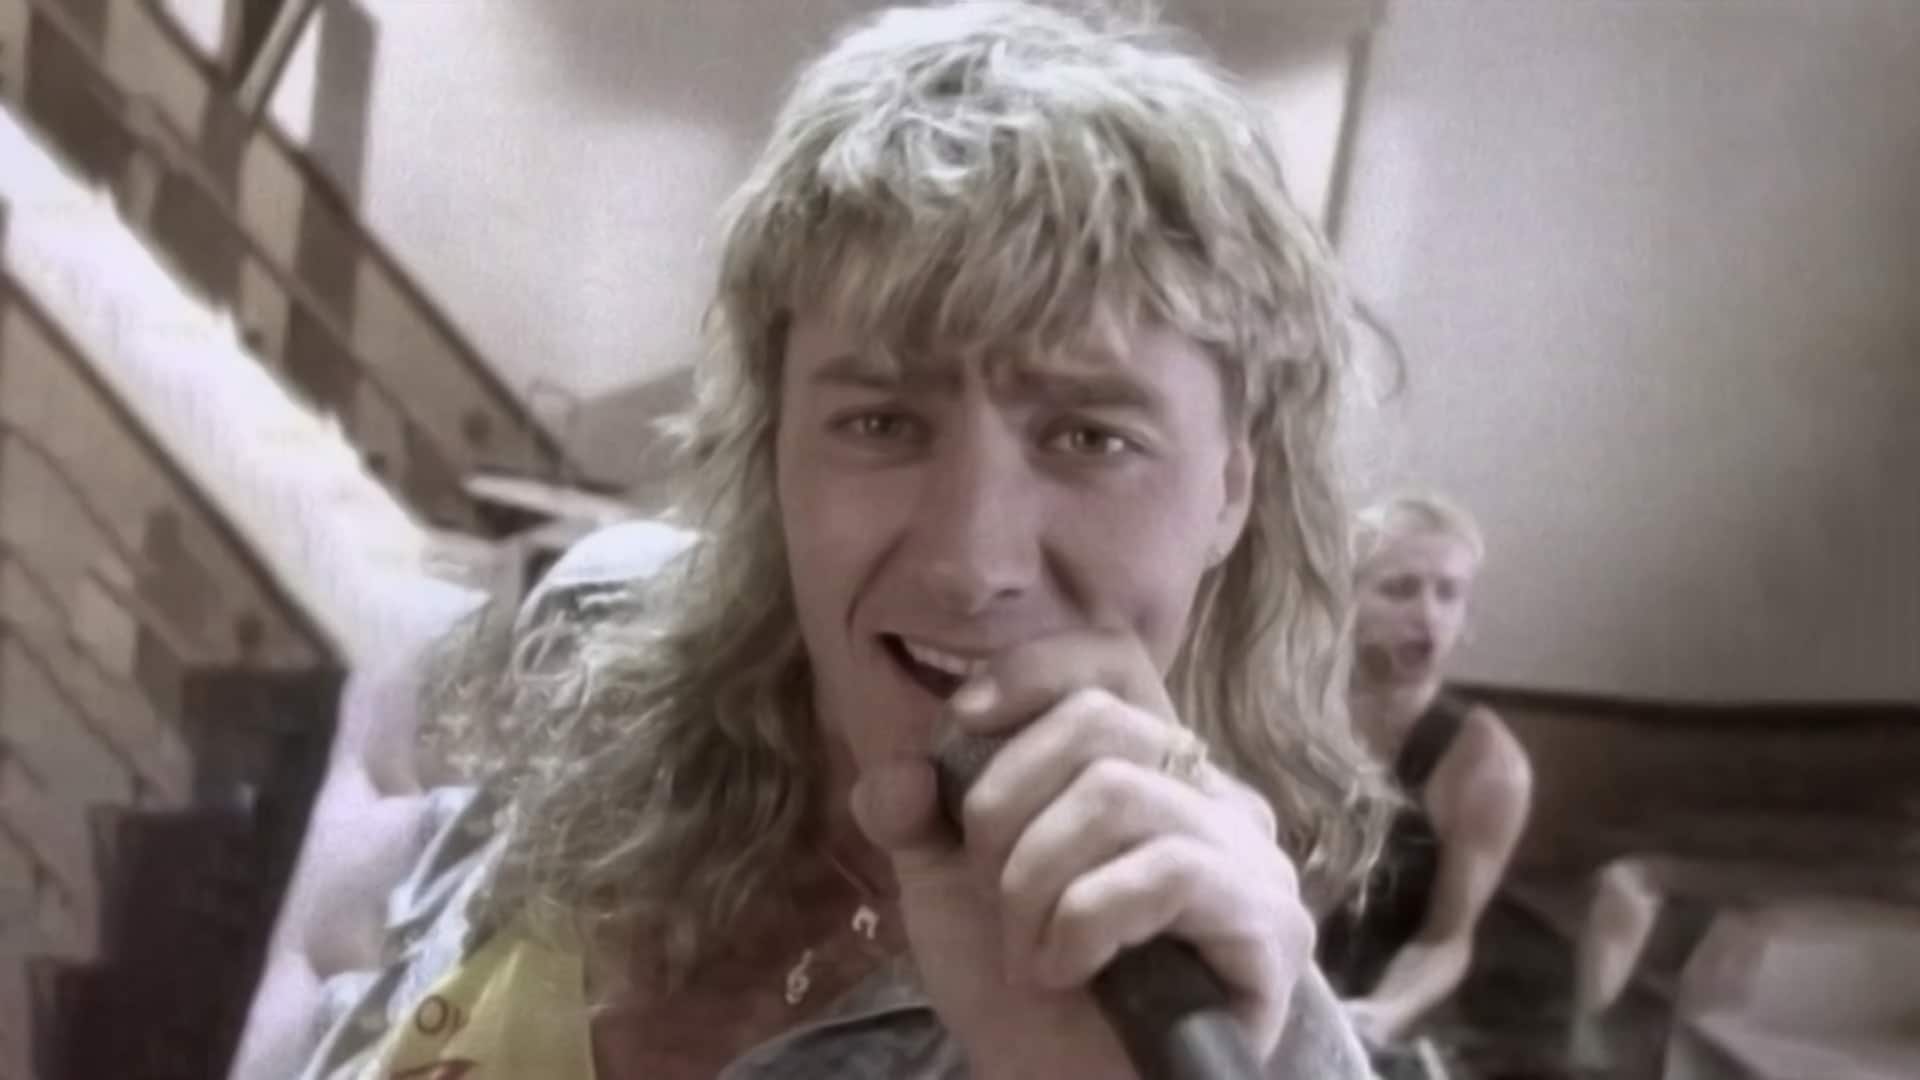 Def Leppard - Pour Some Sugar On Me